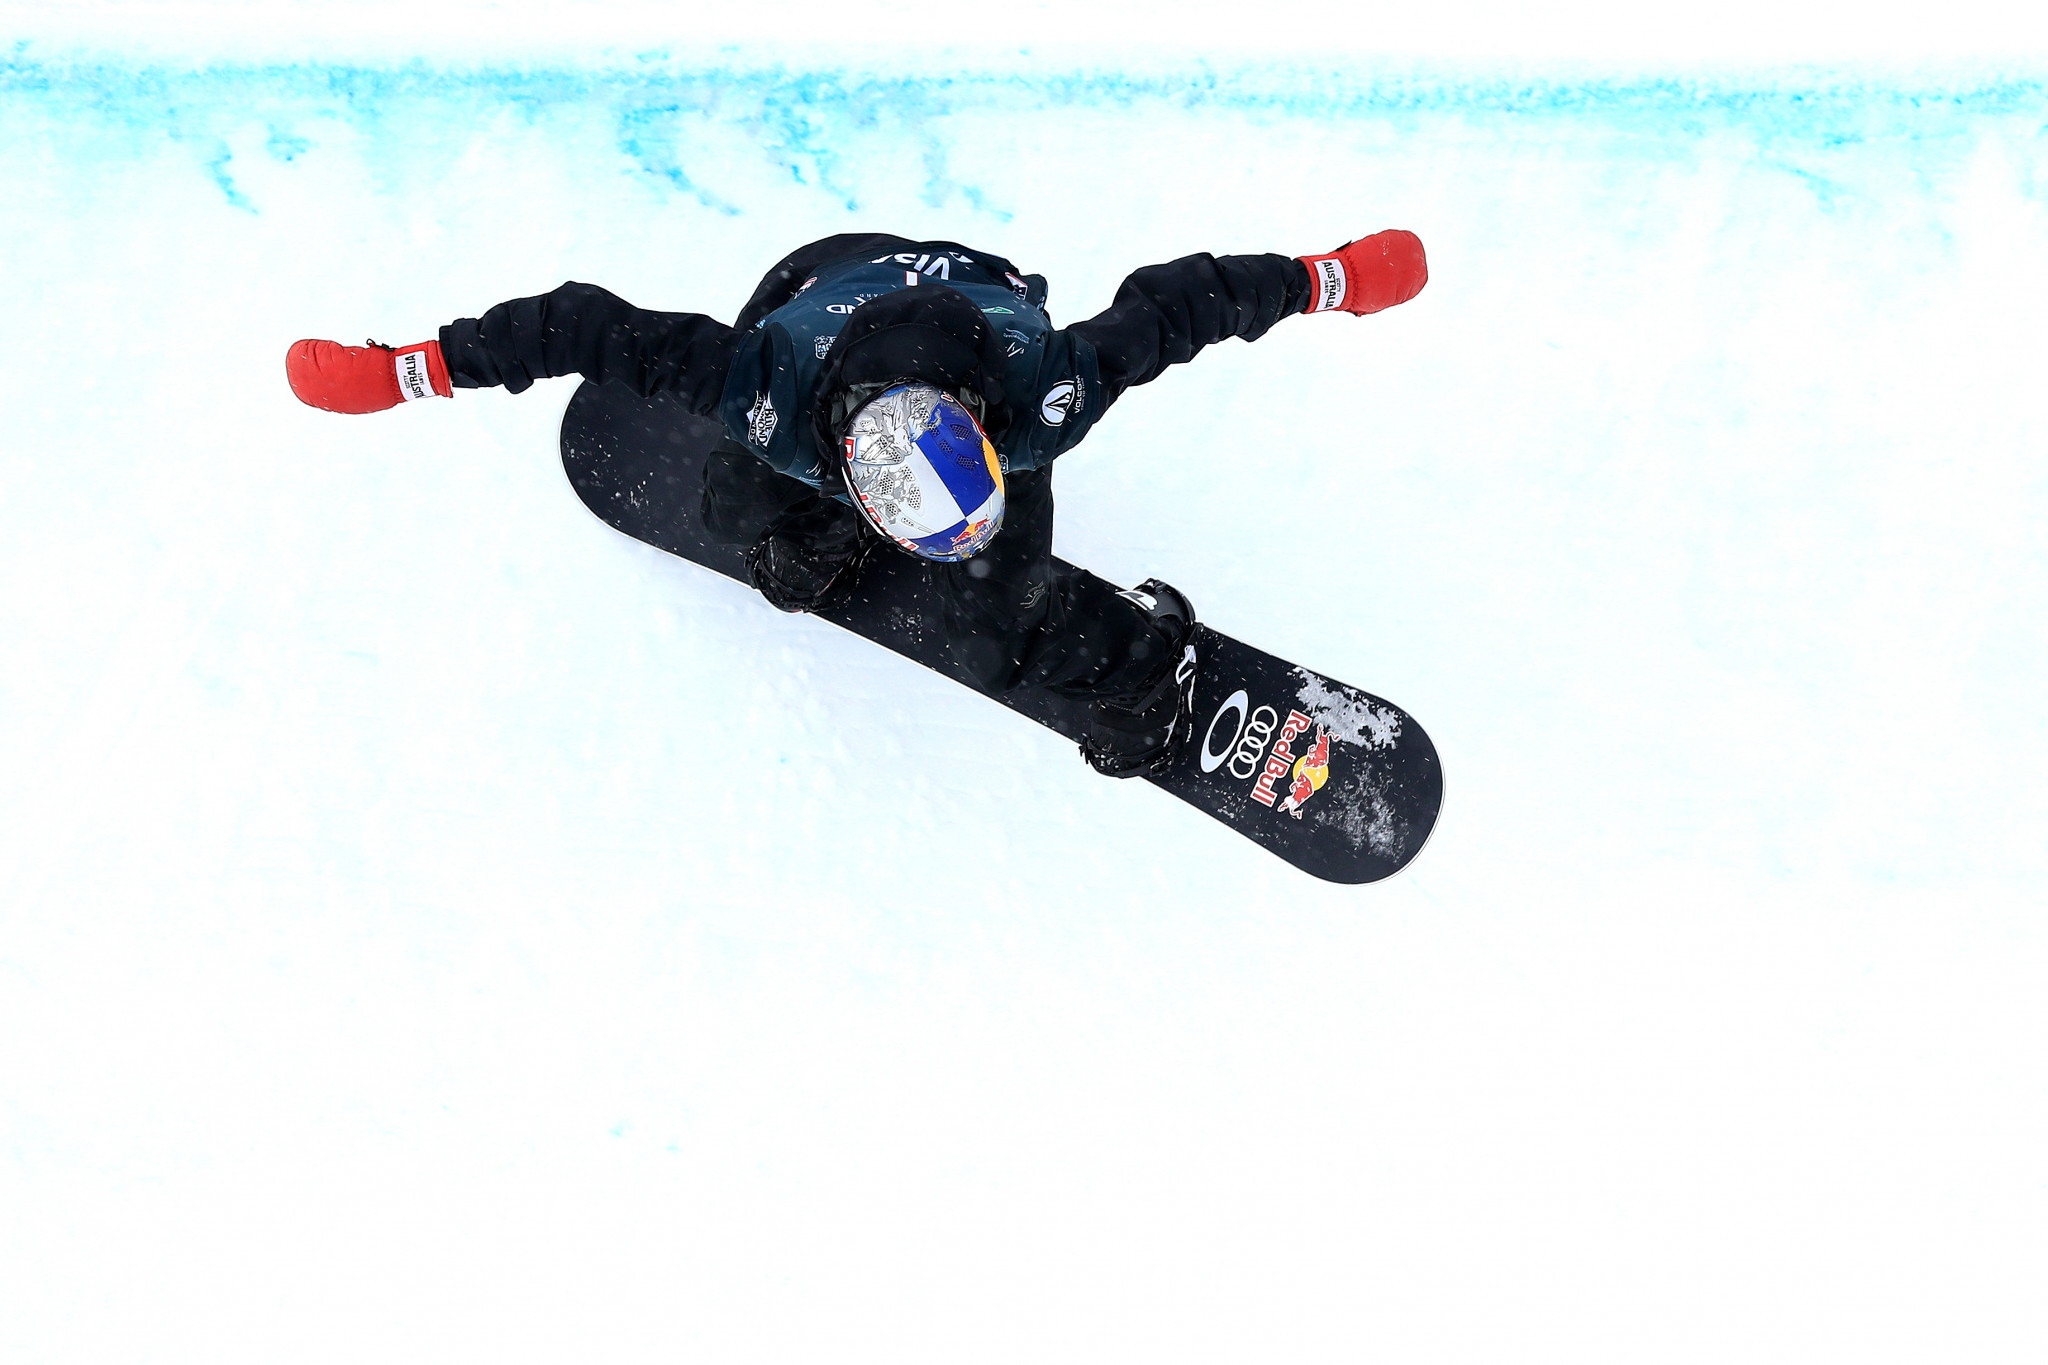 Scotty James continued his good form in the men's snowboard halfpipe ©Getty Images